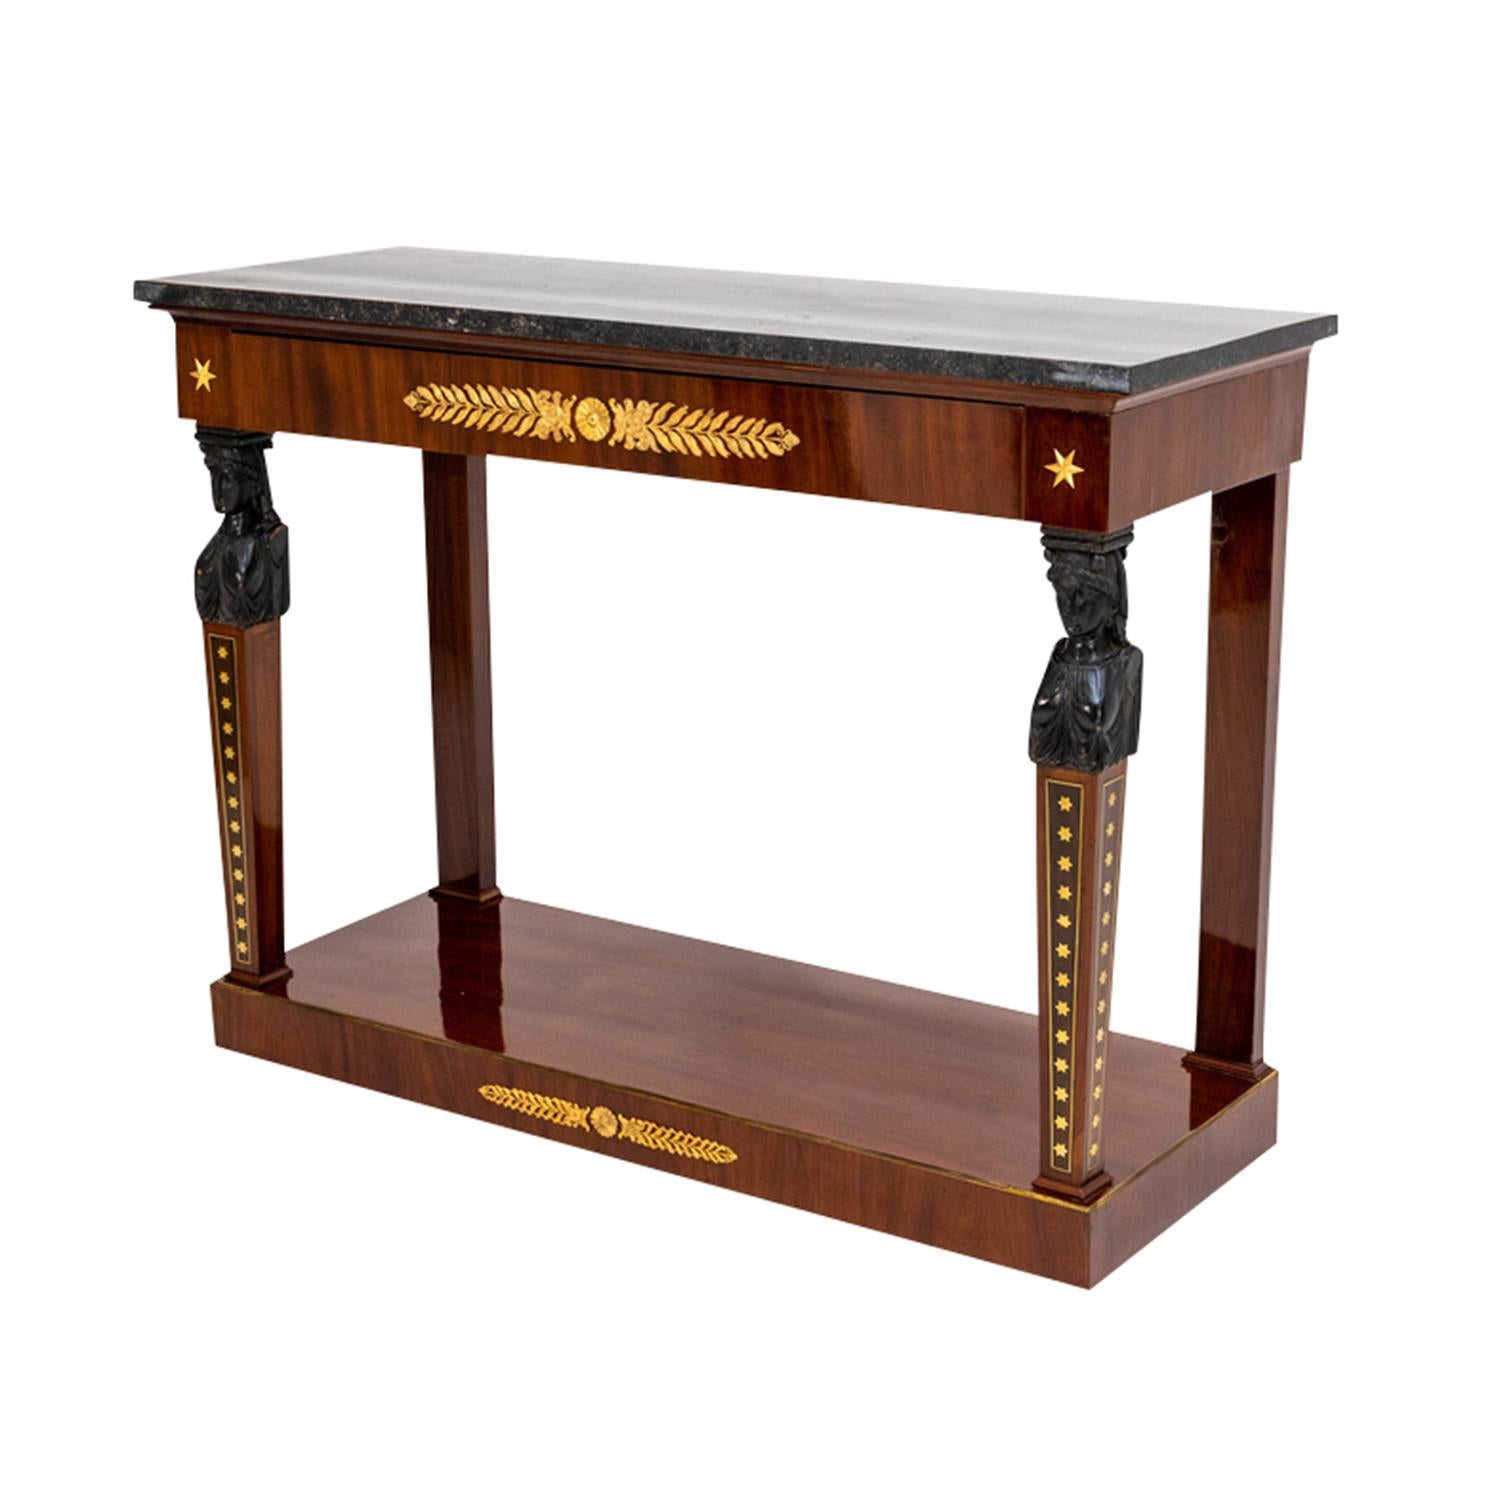 An early 19th Century, antique French Retour d'Egpyte freestanding console table made of hand crafted shellac polished, partly veneered Mahogany, in good condition. The rectangular table is composed with one small drawer, consisting a grey Belgian